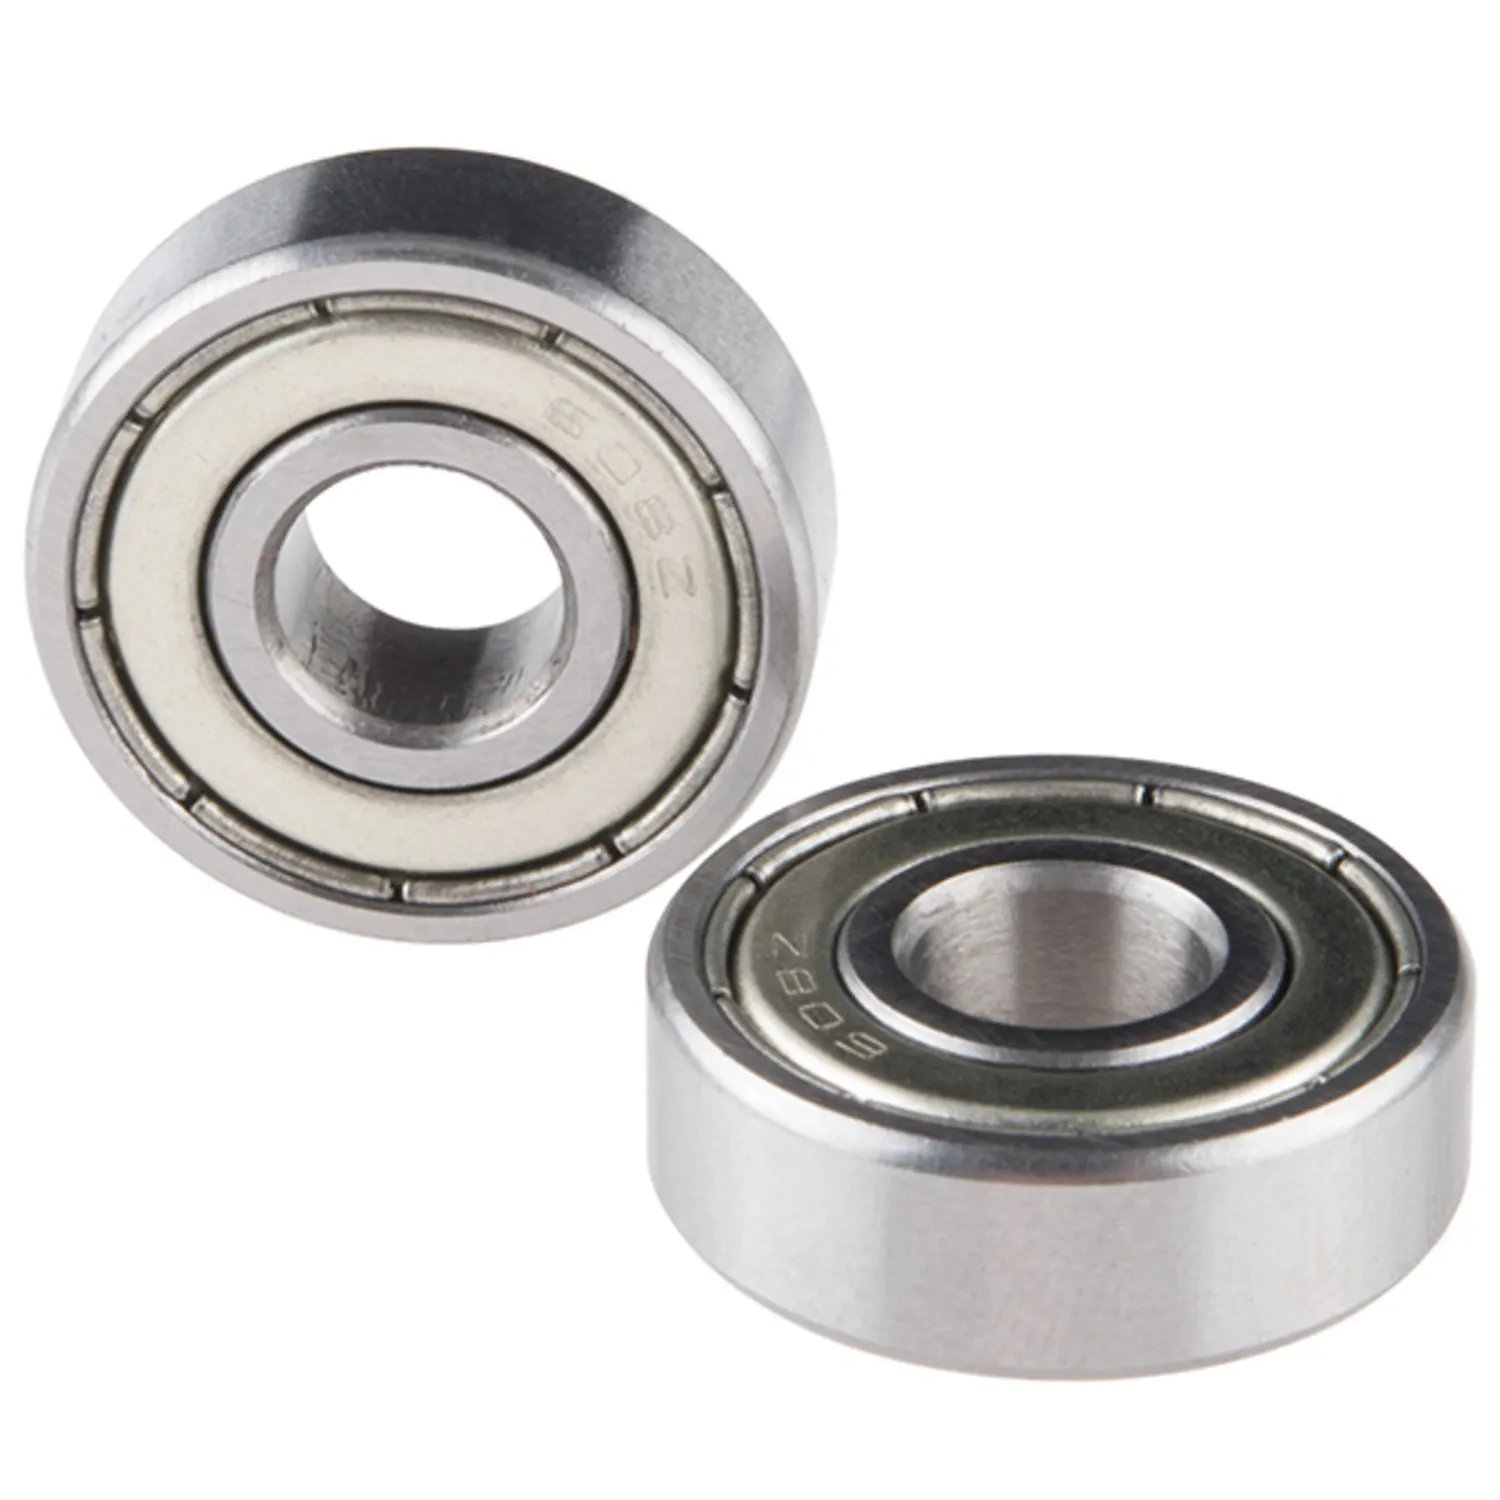 Photo of Ball Bearing - Non-Flanged (8mm Bore, 22mm OD, 2 Pack)